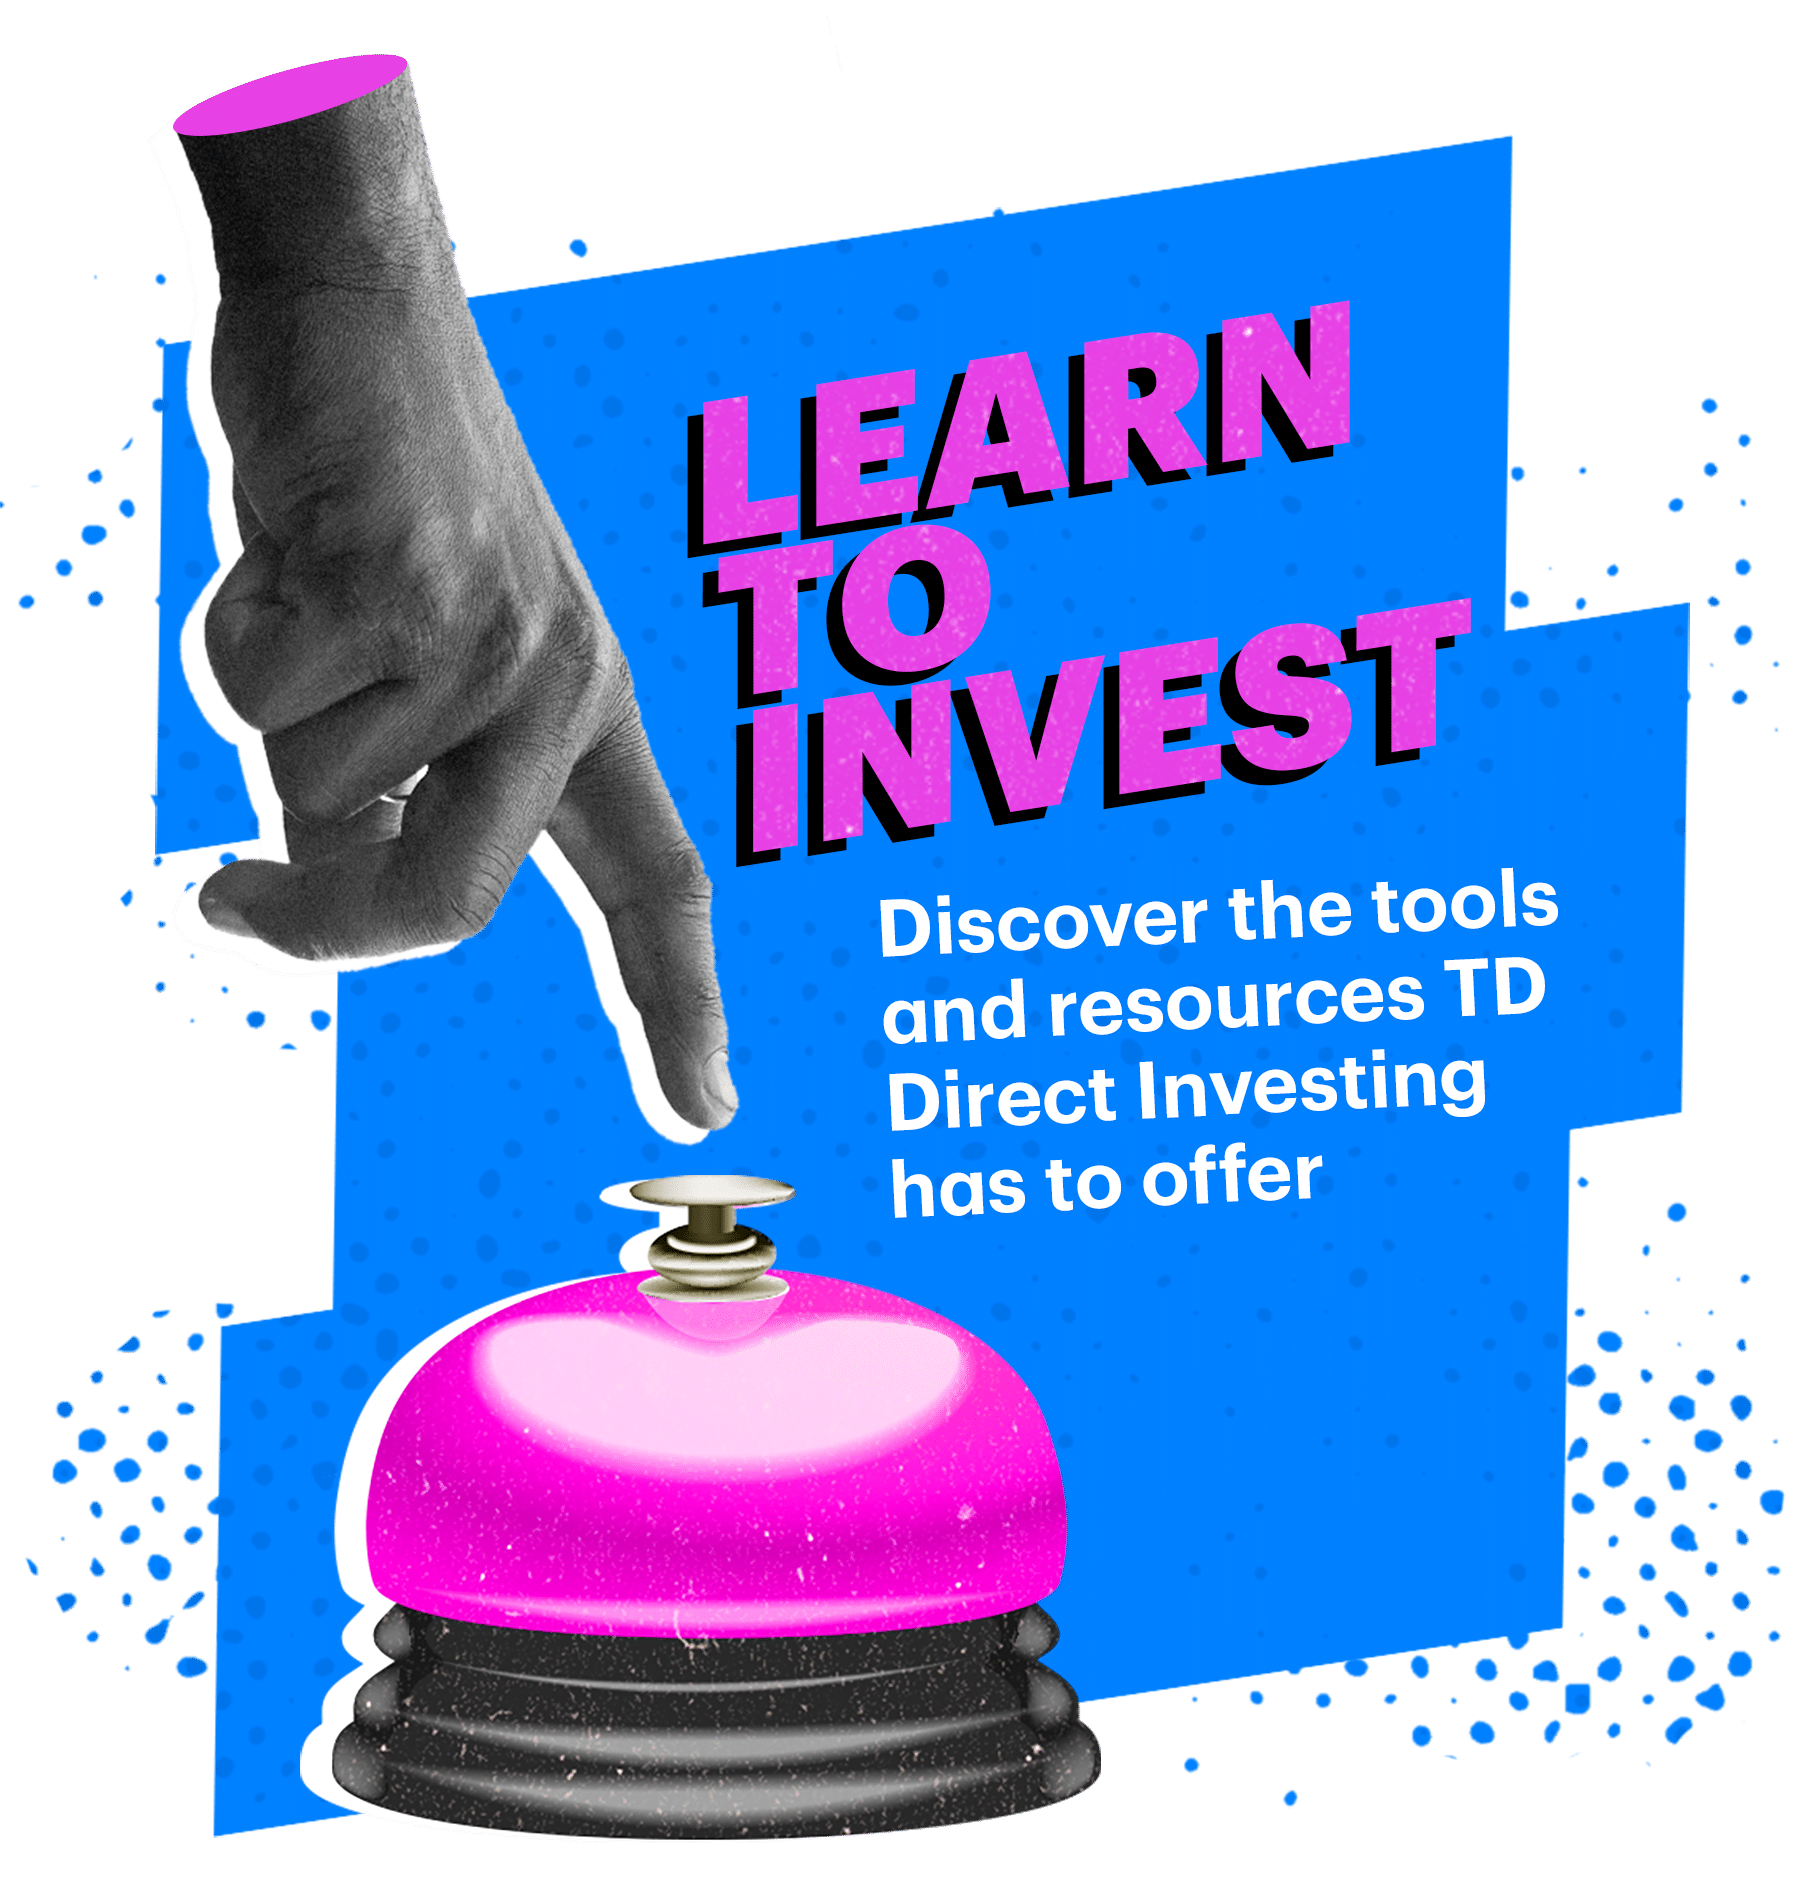 Learn to Invest. Discover the tools and resources TD Direct Investing has to offer